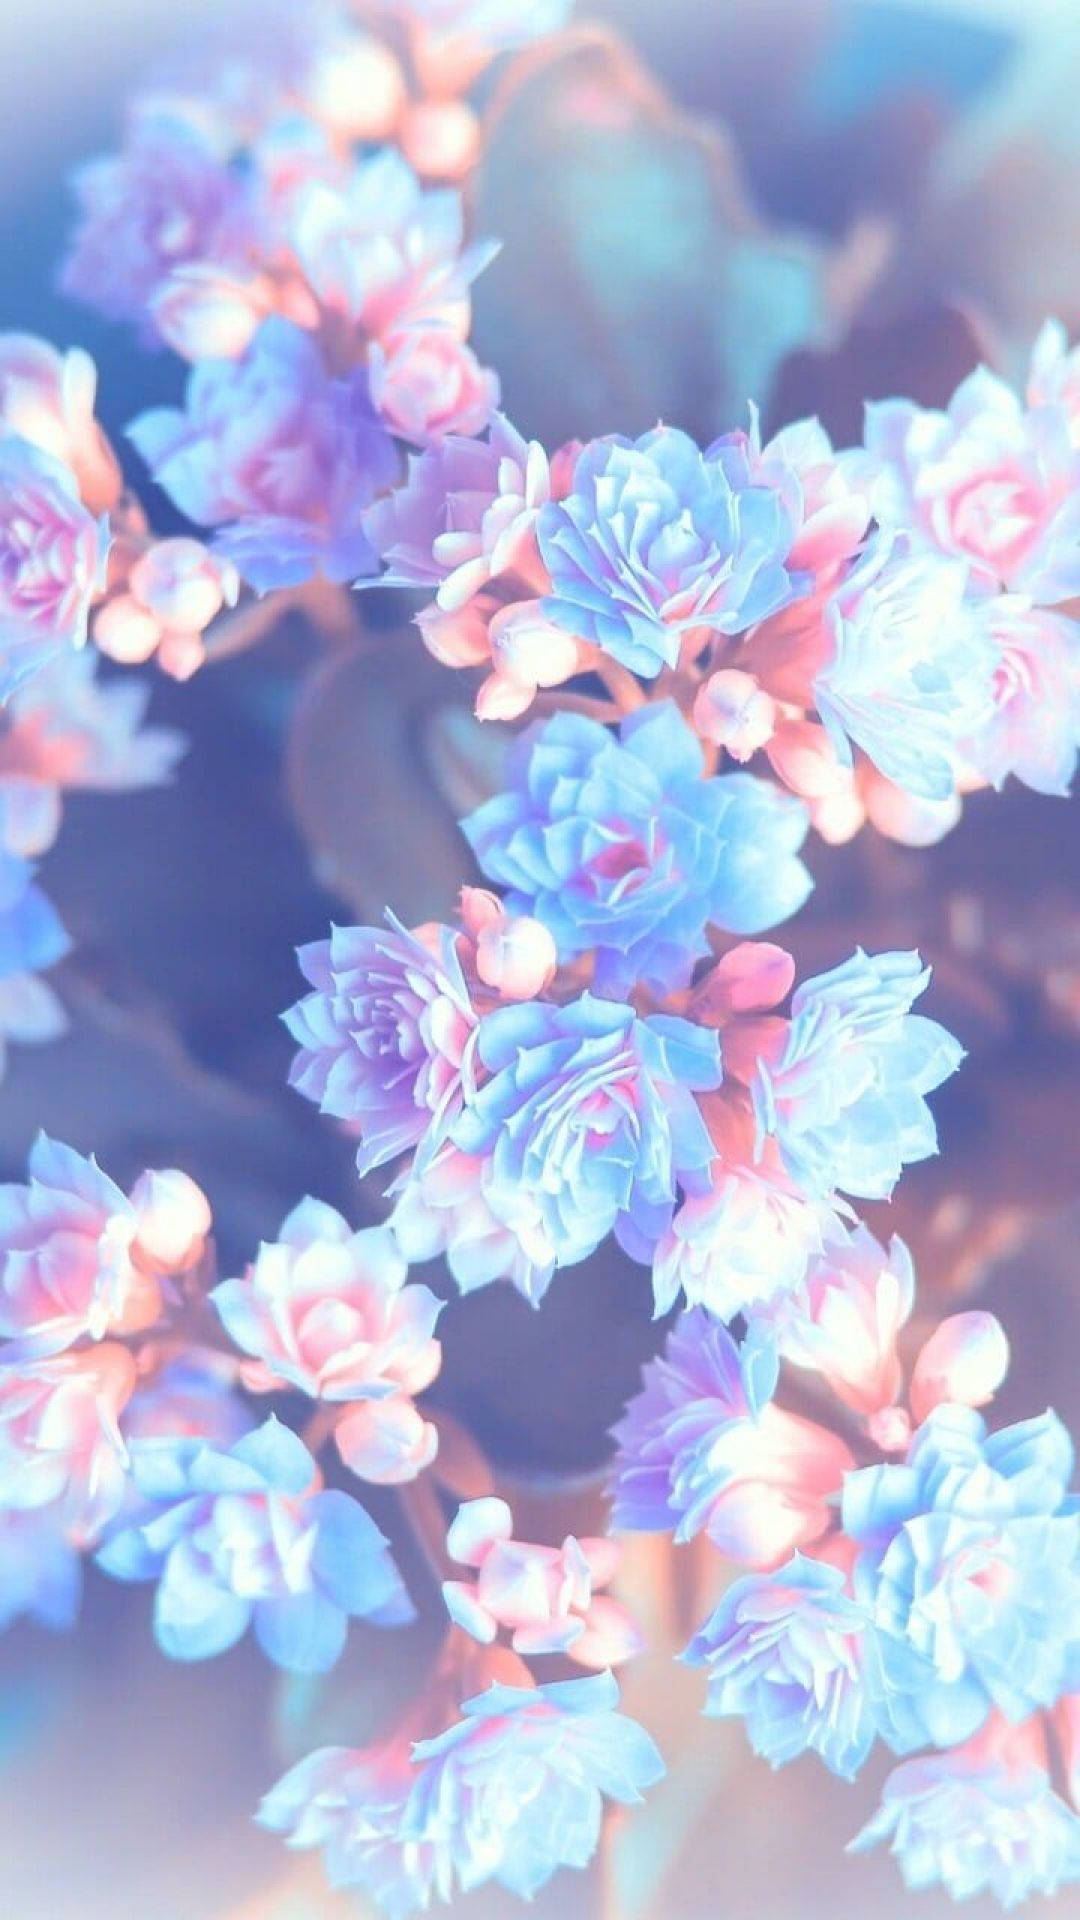 Create a peaceful and calming atmosphere with this Pastel Blue Aesthetic iPhone wallpaper Wallpaper